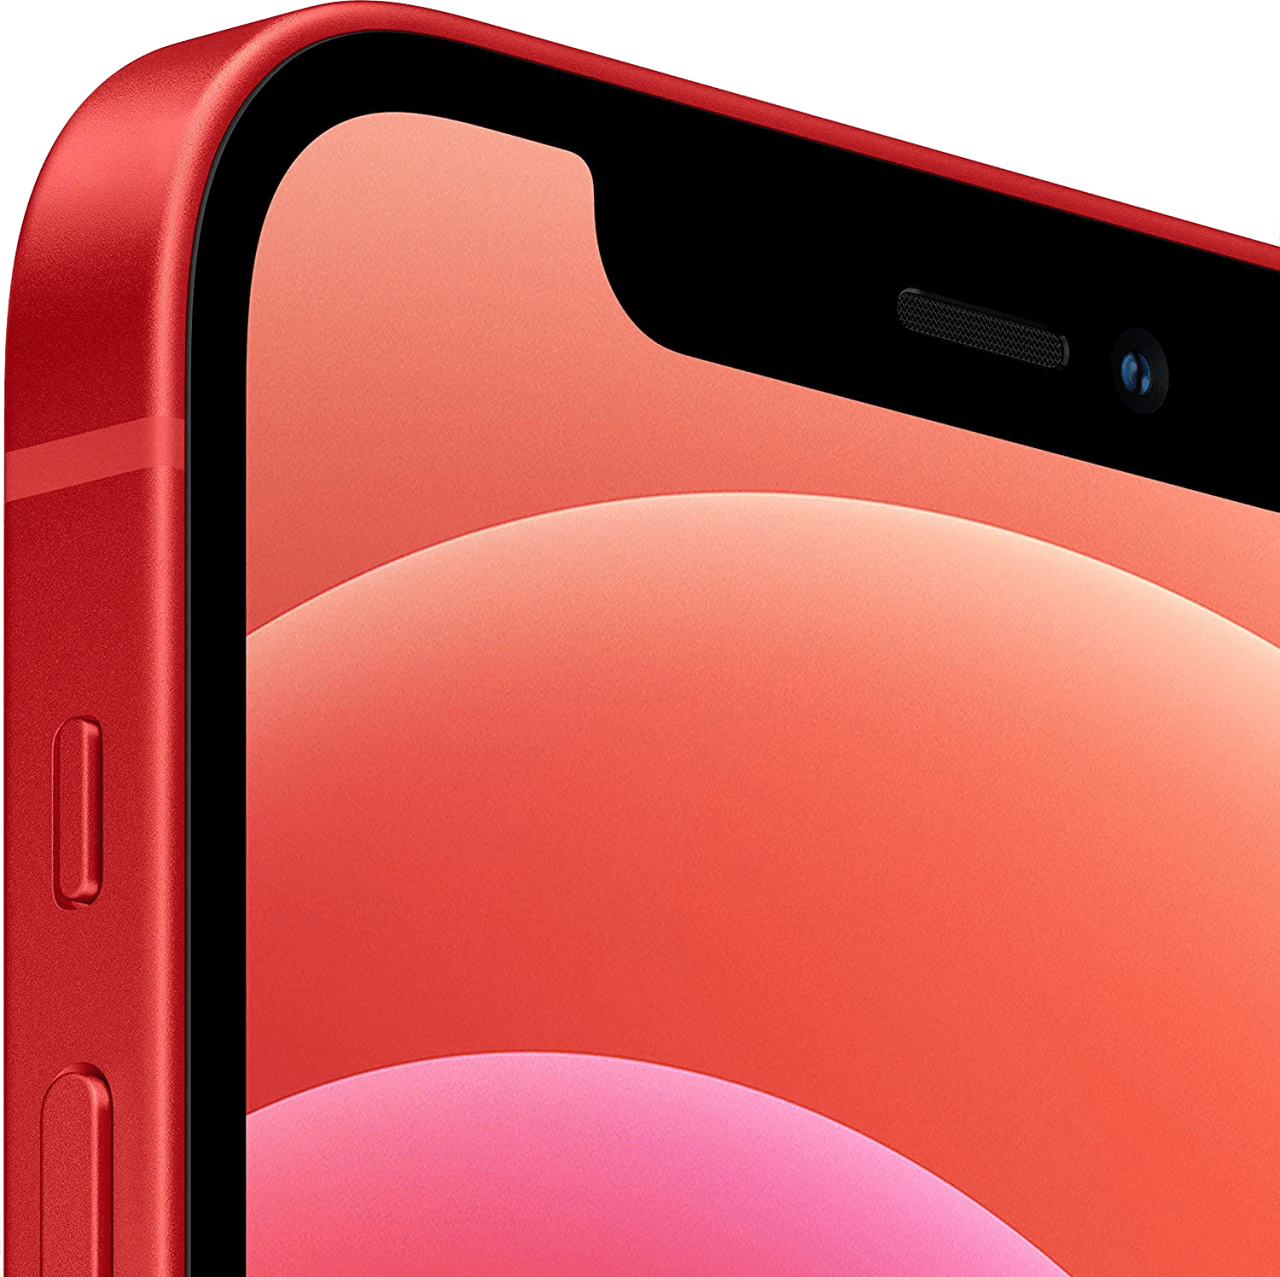 Apple announces iPhone 12 and iPhone 12 mini: A new era for iPhone with 5G  - Apple (CZ)